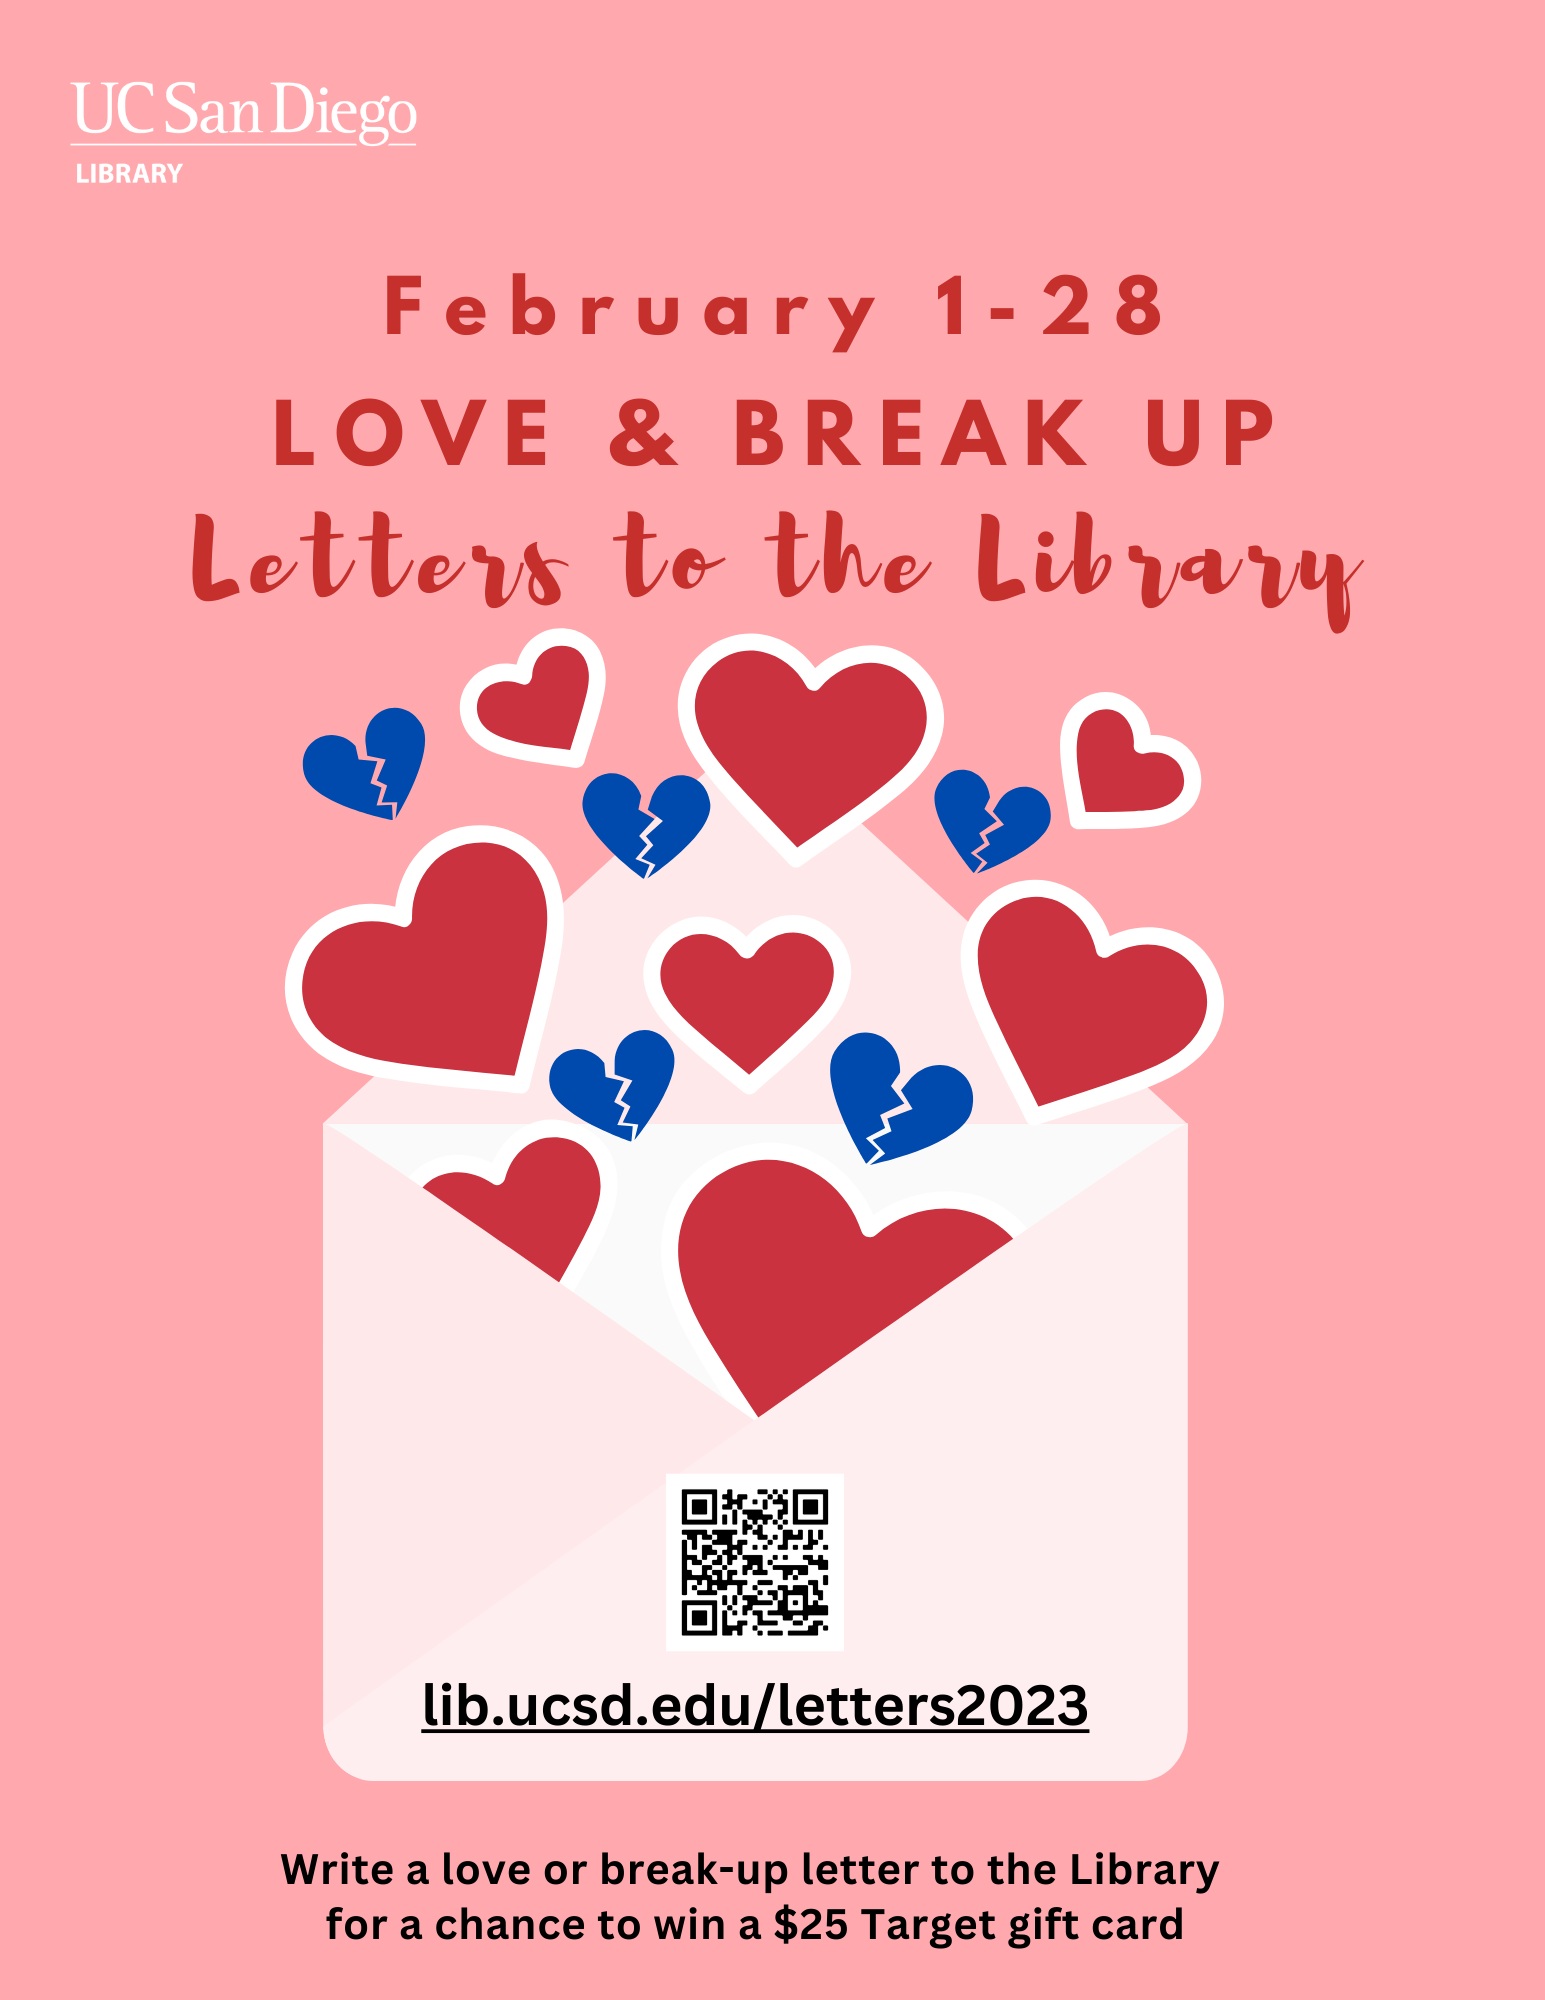 Link to Letters to the Library website.